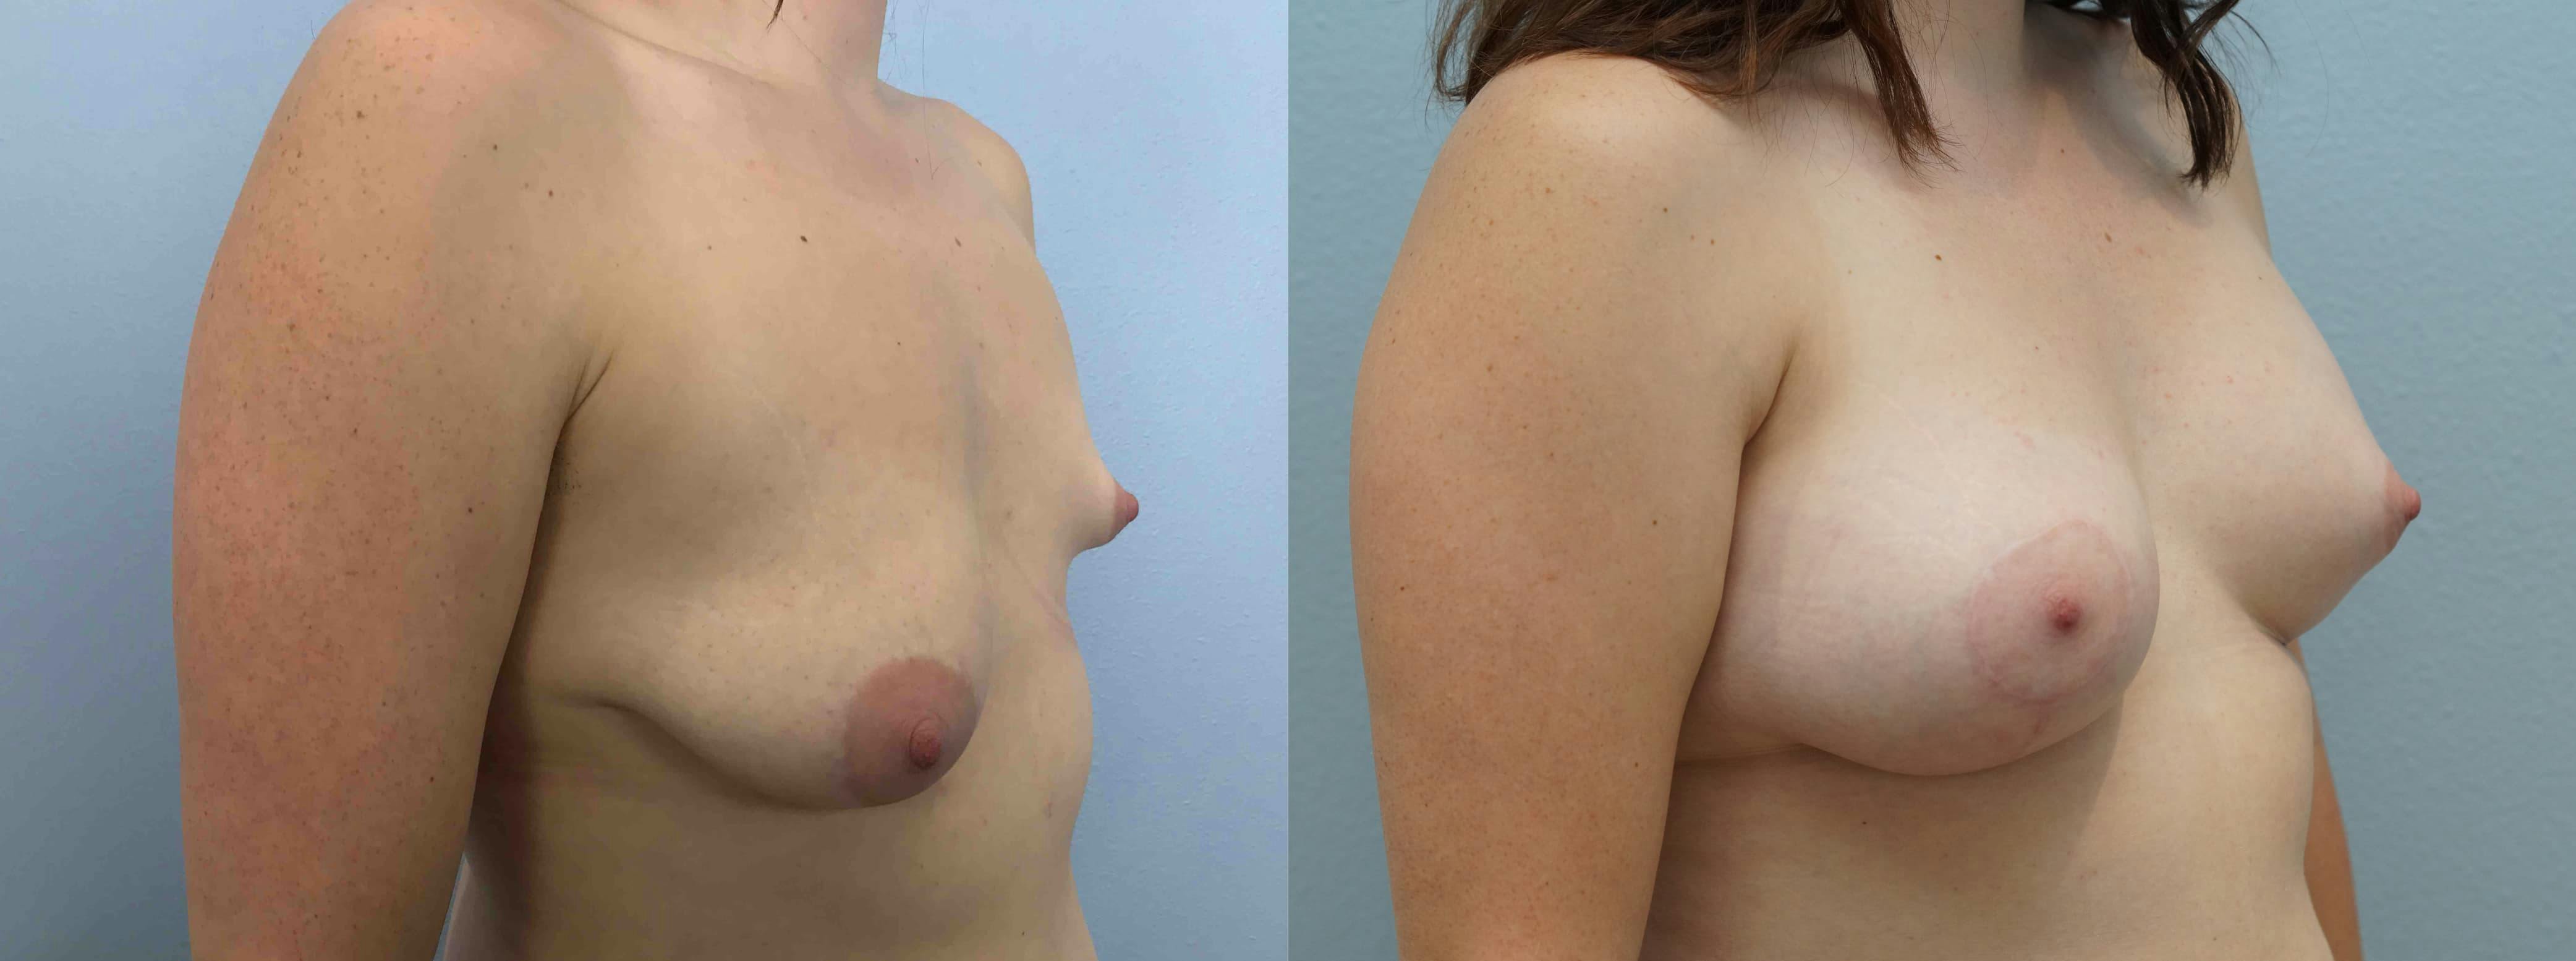 Breast Lift With Implants Gallery - Patient 75539521 - Image 2